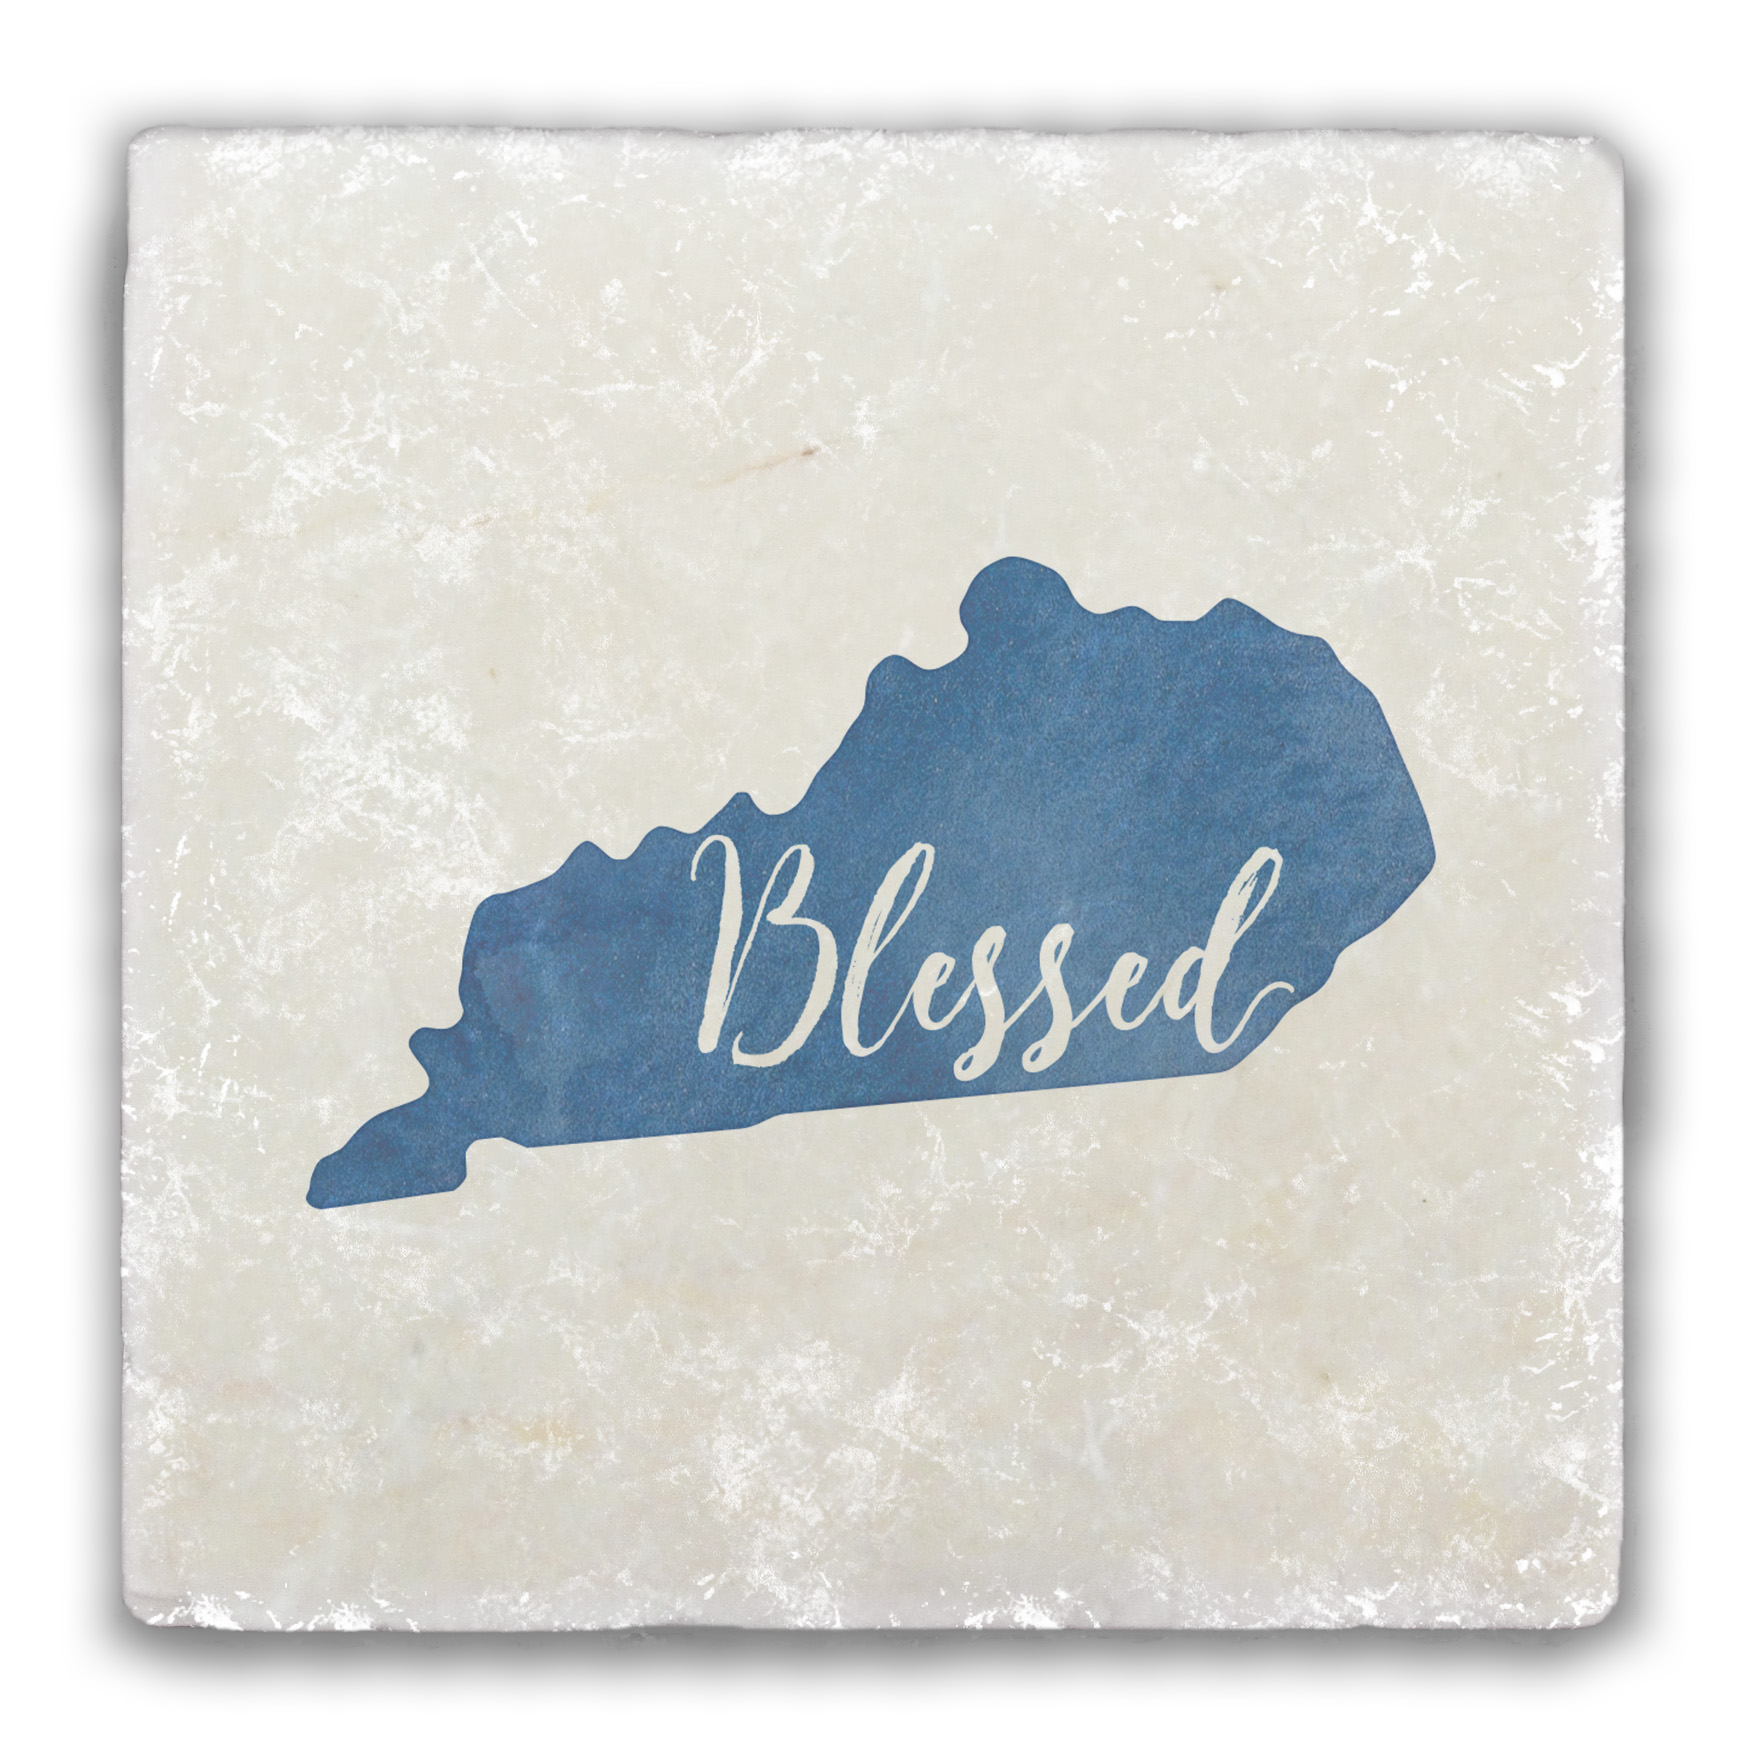 Blessed State coaster